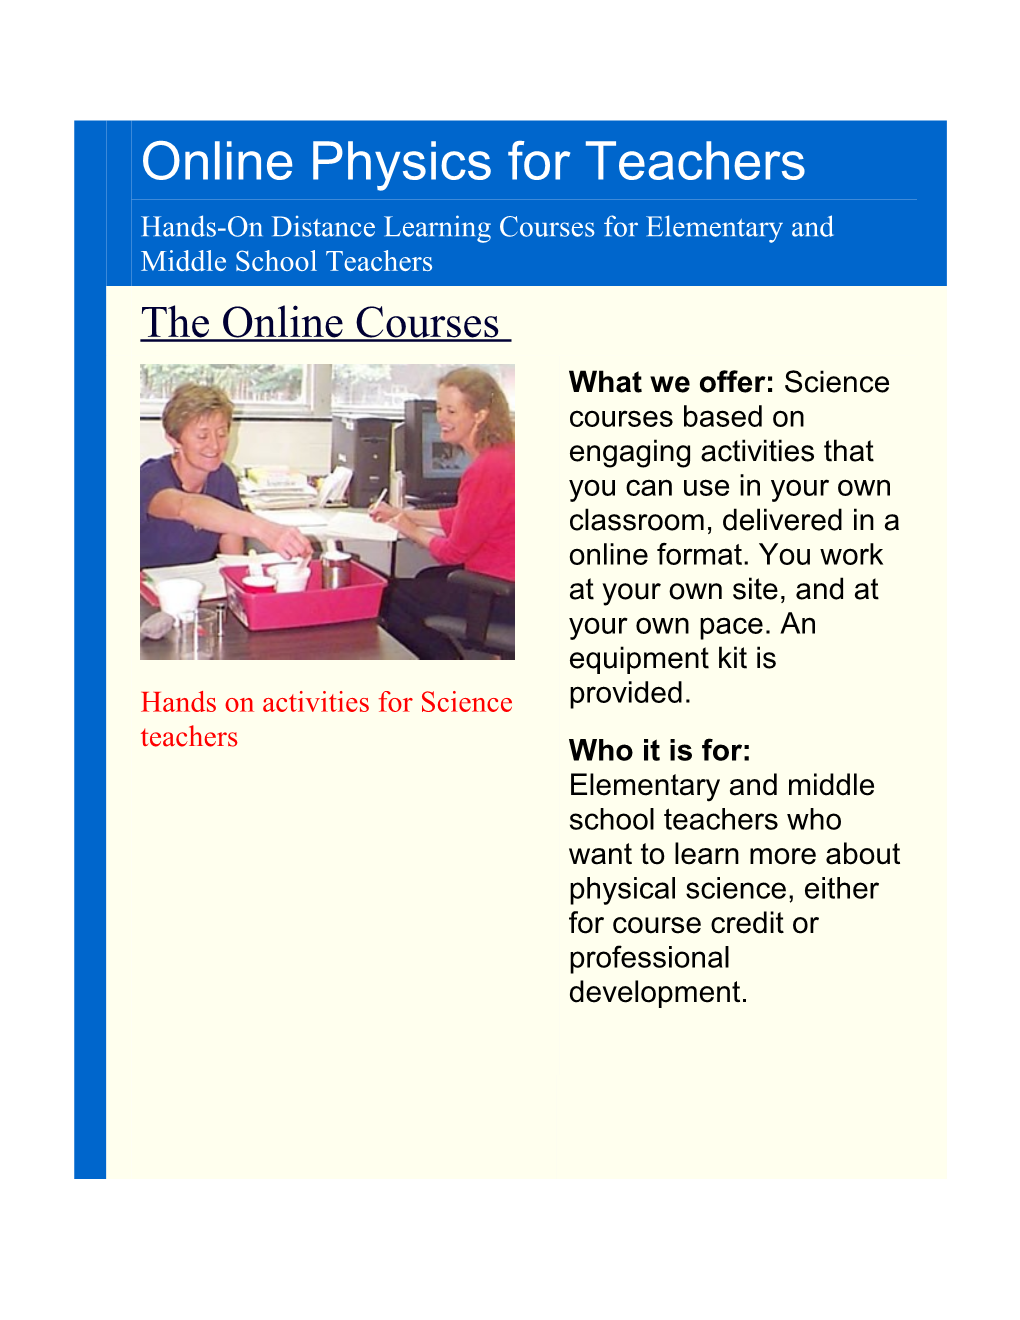 How These Courses Work